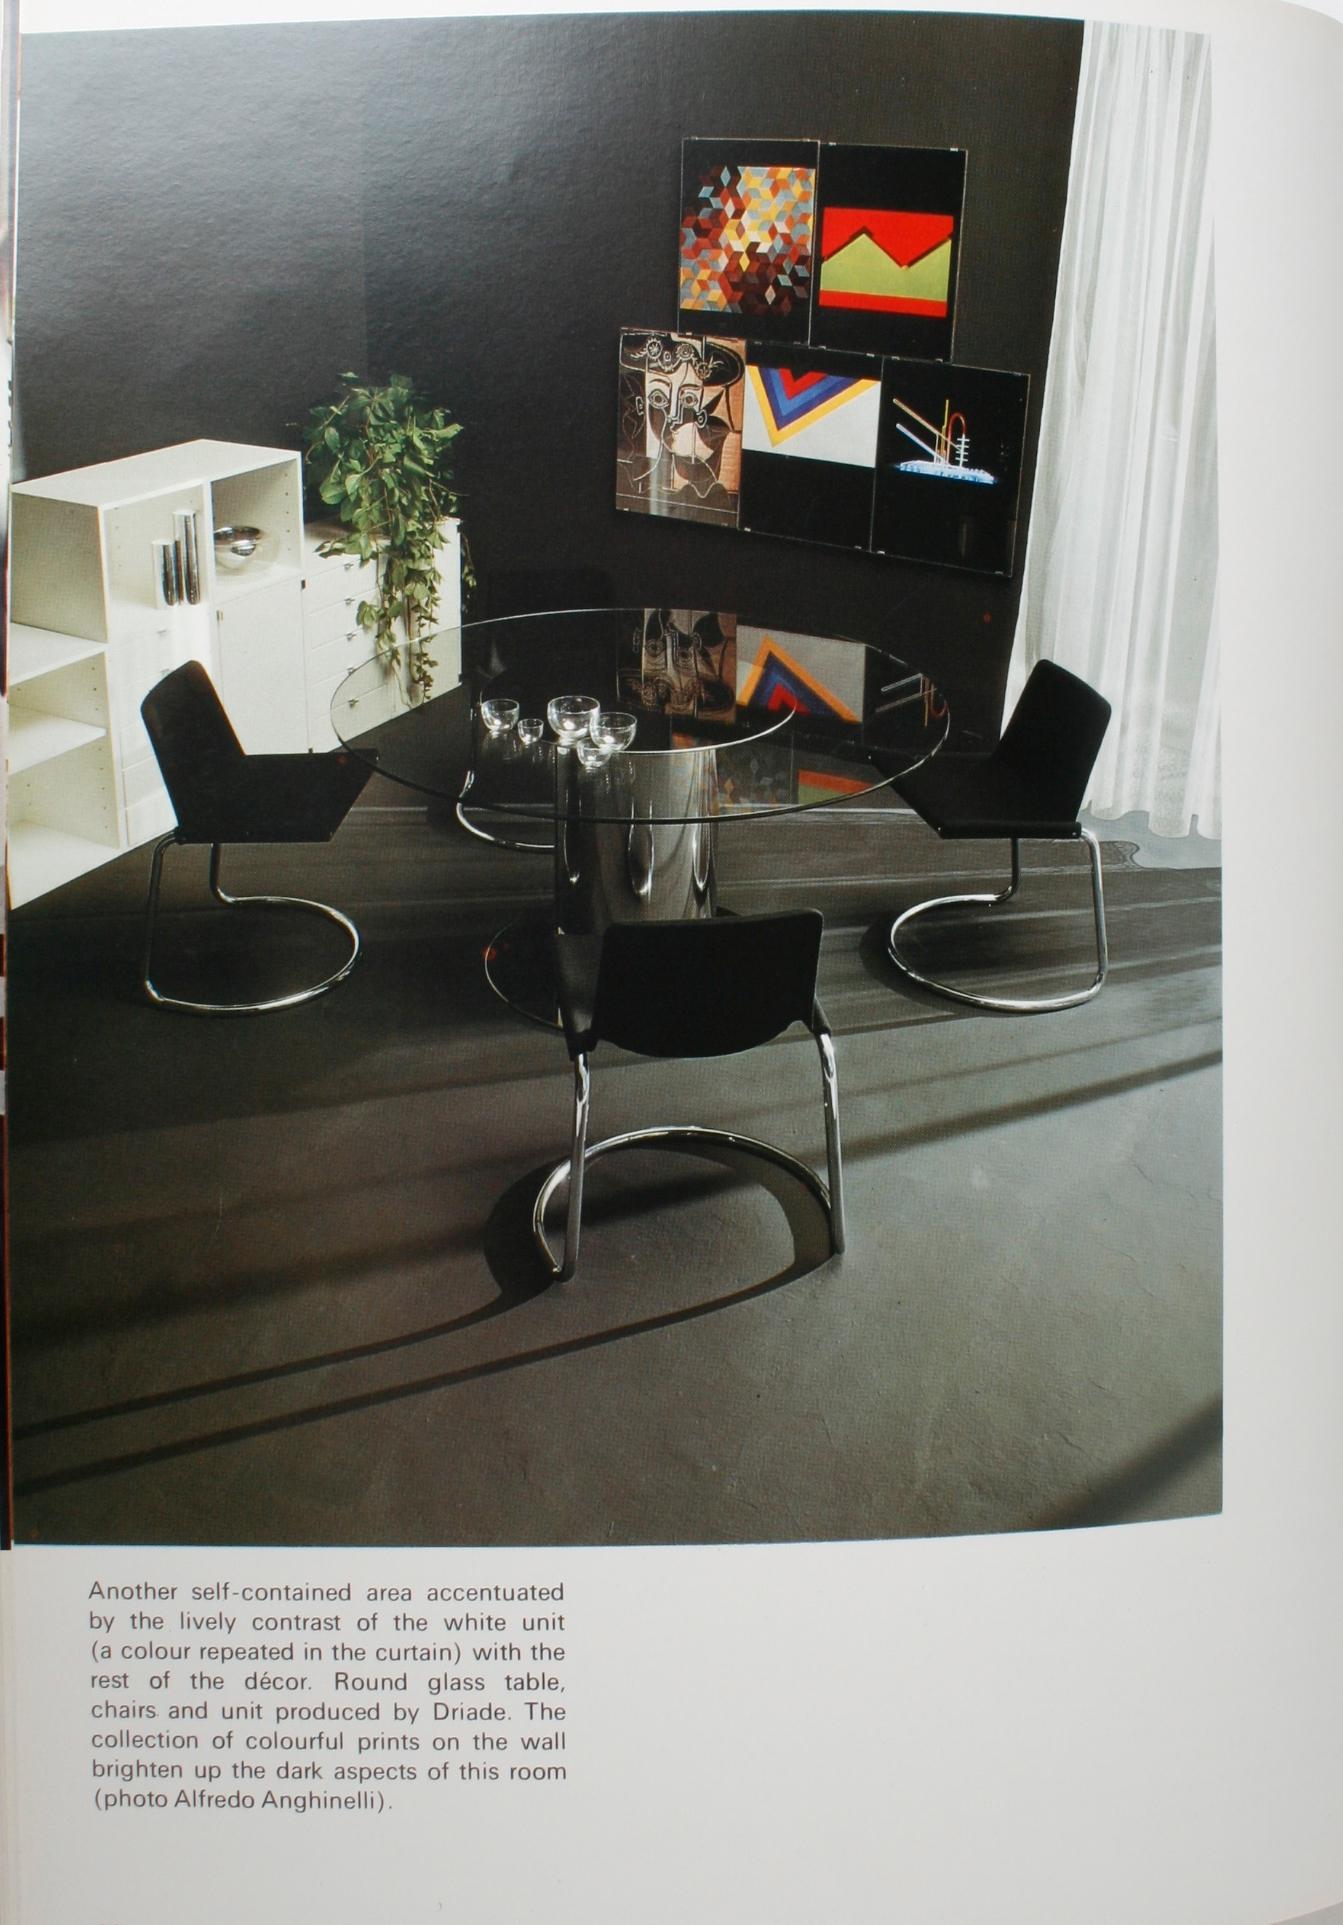 Interiors for Today, First Edition 2